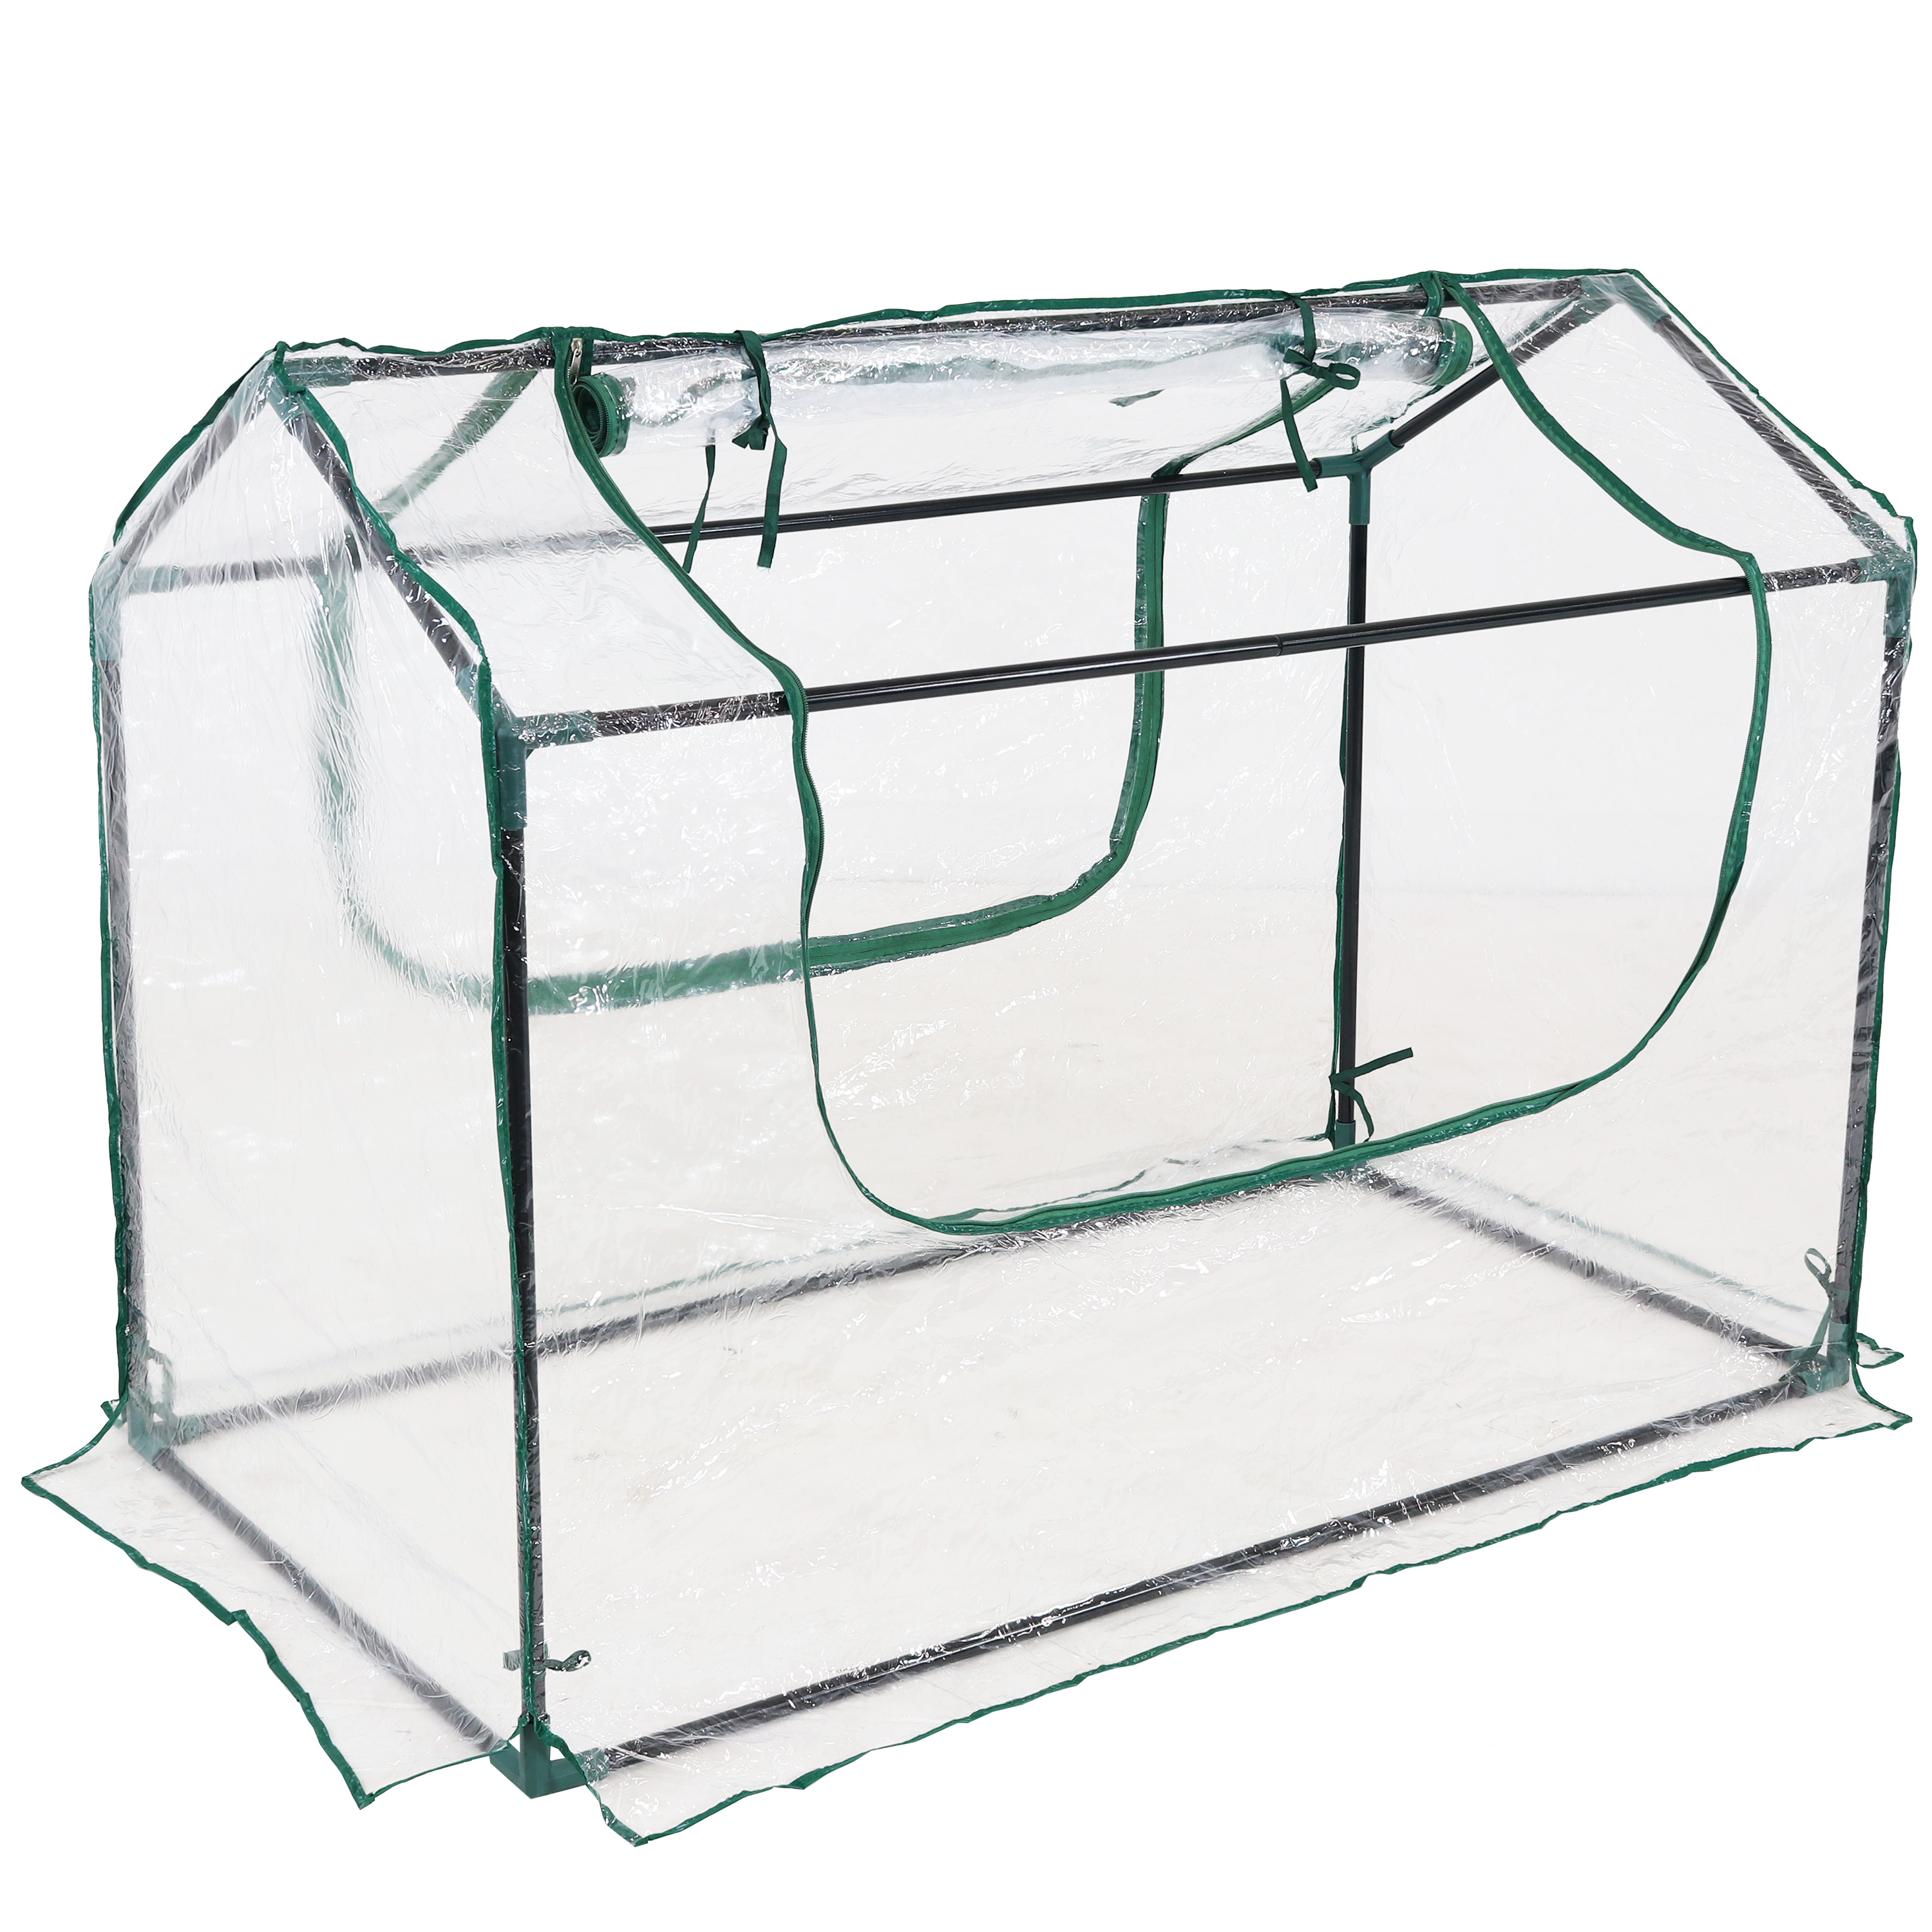 4 x 2 ft Steel Mini Greenhouse with 2 Doors - Clear